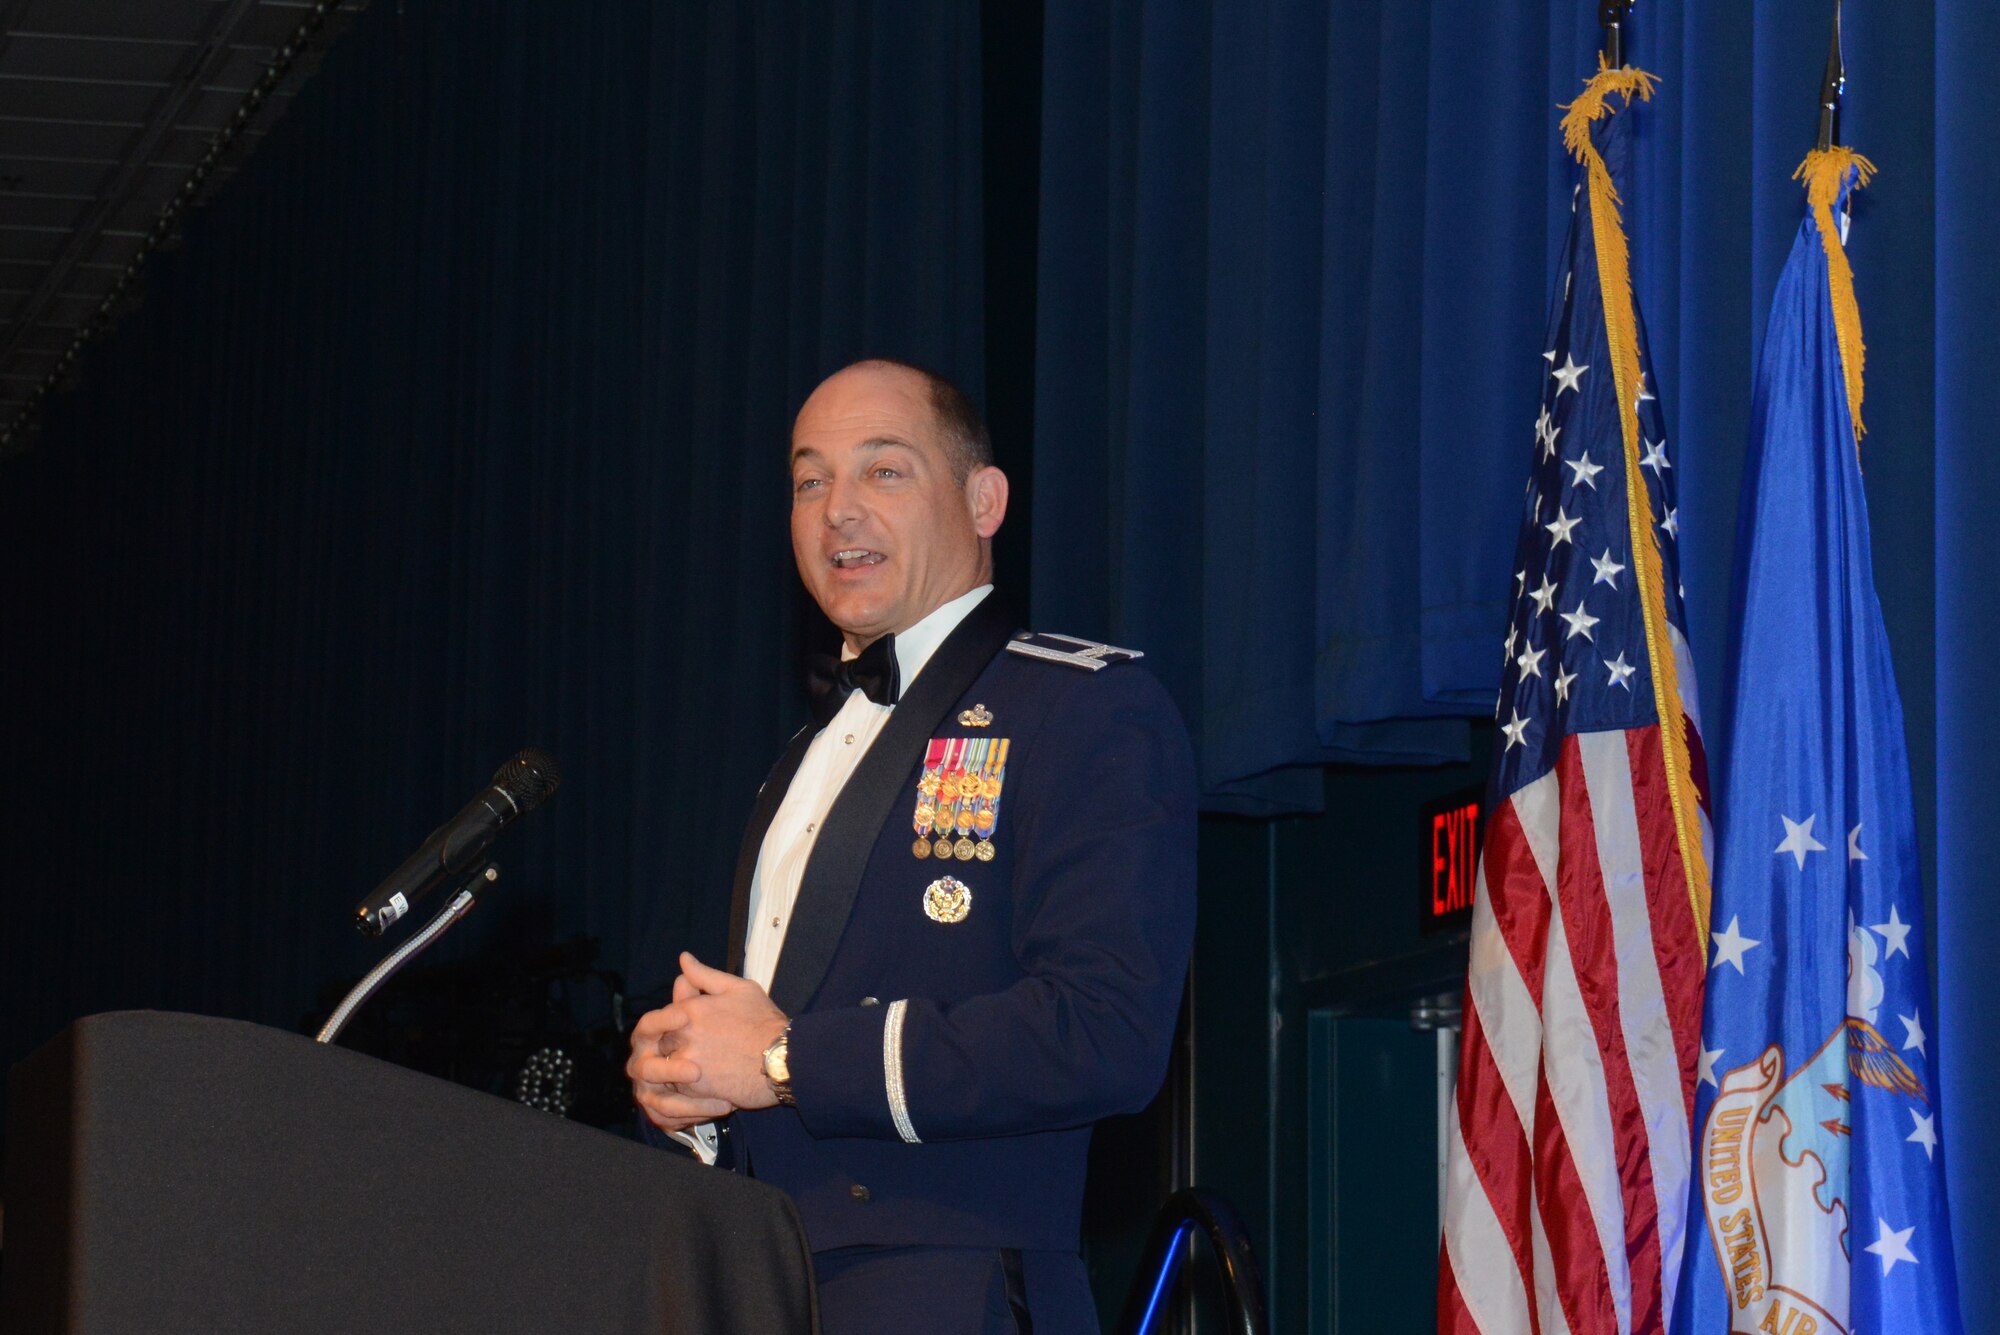 Air Force Col. George T.M. Dietrich III, Joint Base Elmendorf-Richardson and 673d Air Base Wing commander, speaks at the 2016 JBER Air Force Ball at the Anchorage Egan Center, Alaska, Sept. 24, 2016. This event marked the Air Force’s 69th birthday celebrating the Air Force’s heritage through reflection, ceremony and camaraderie.